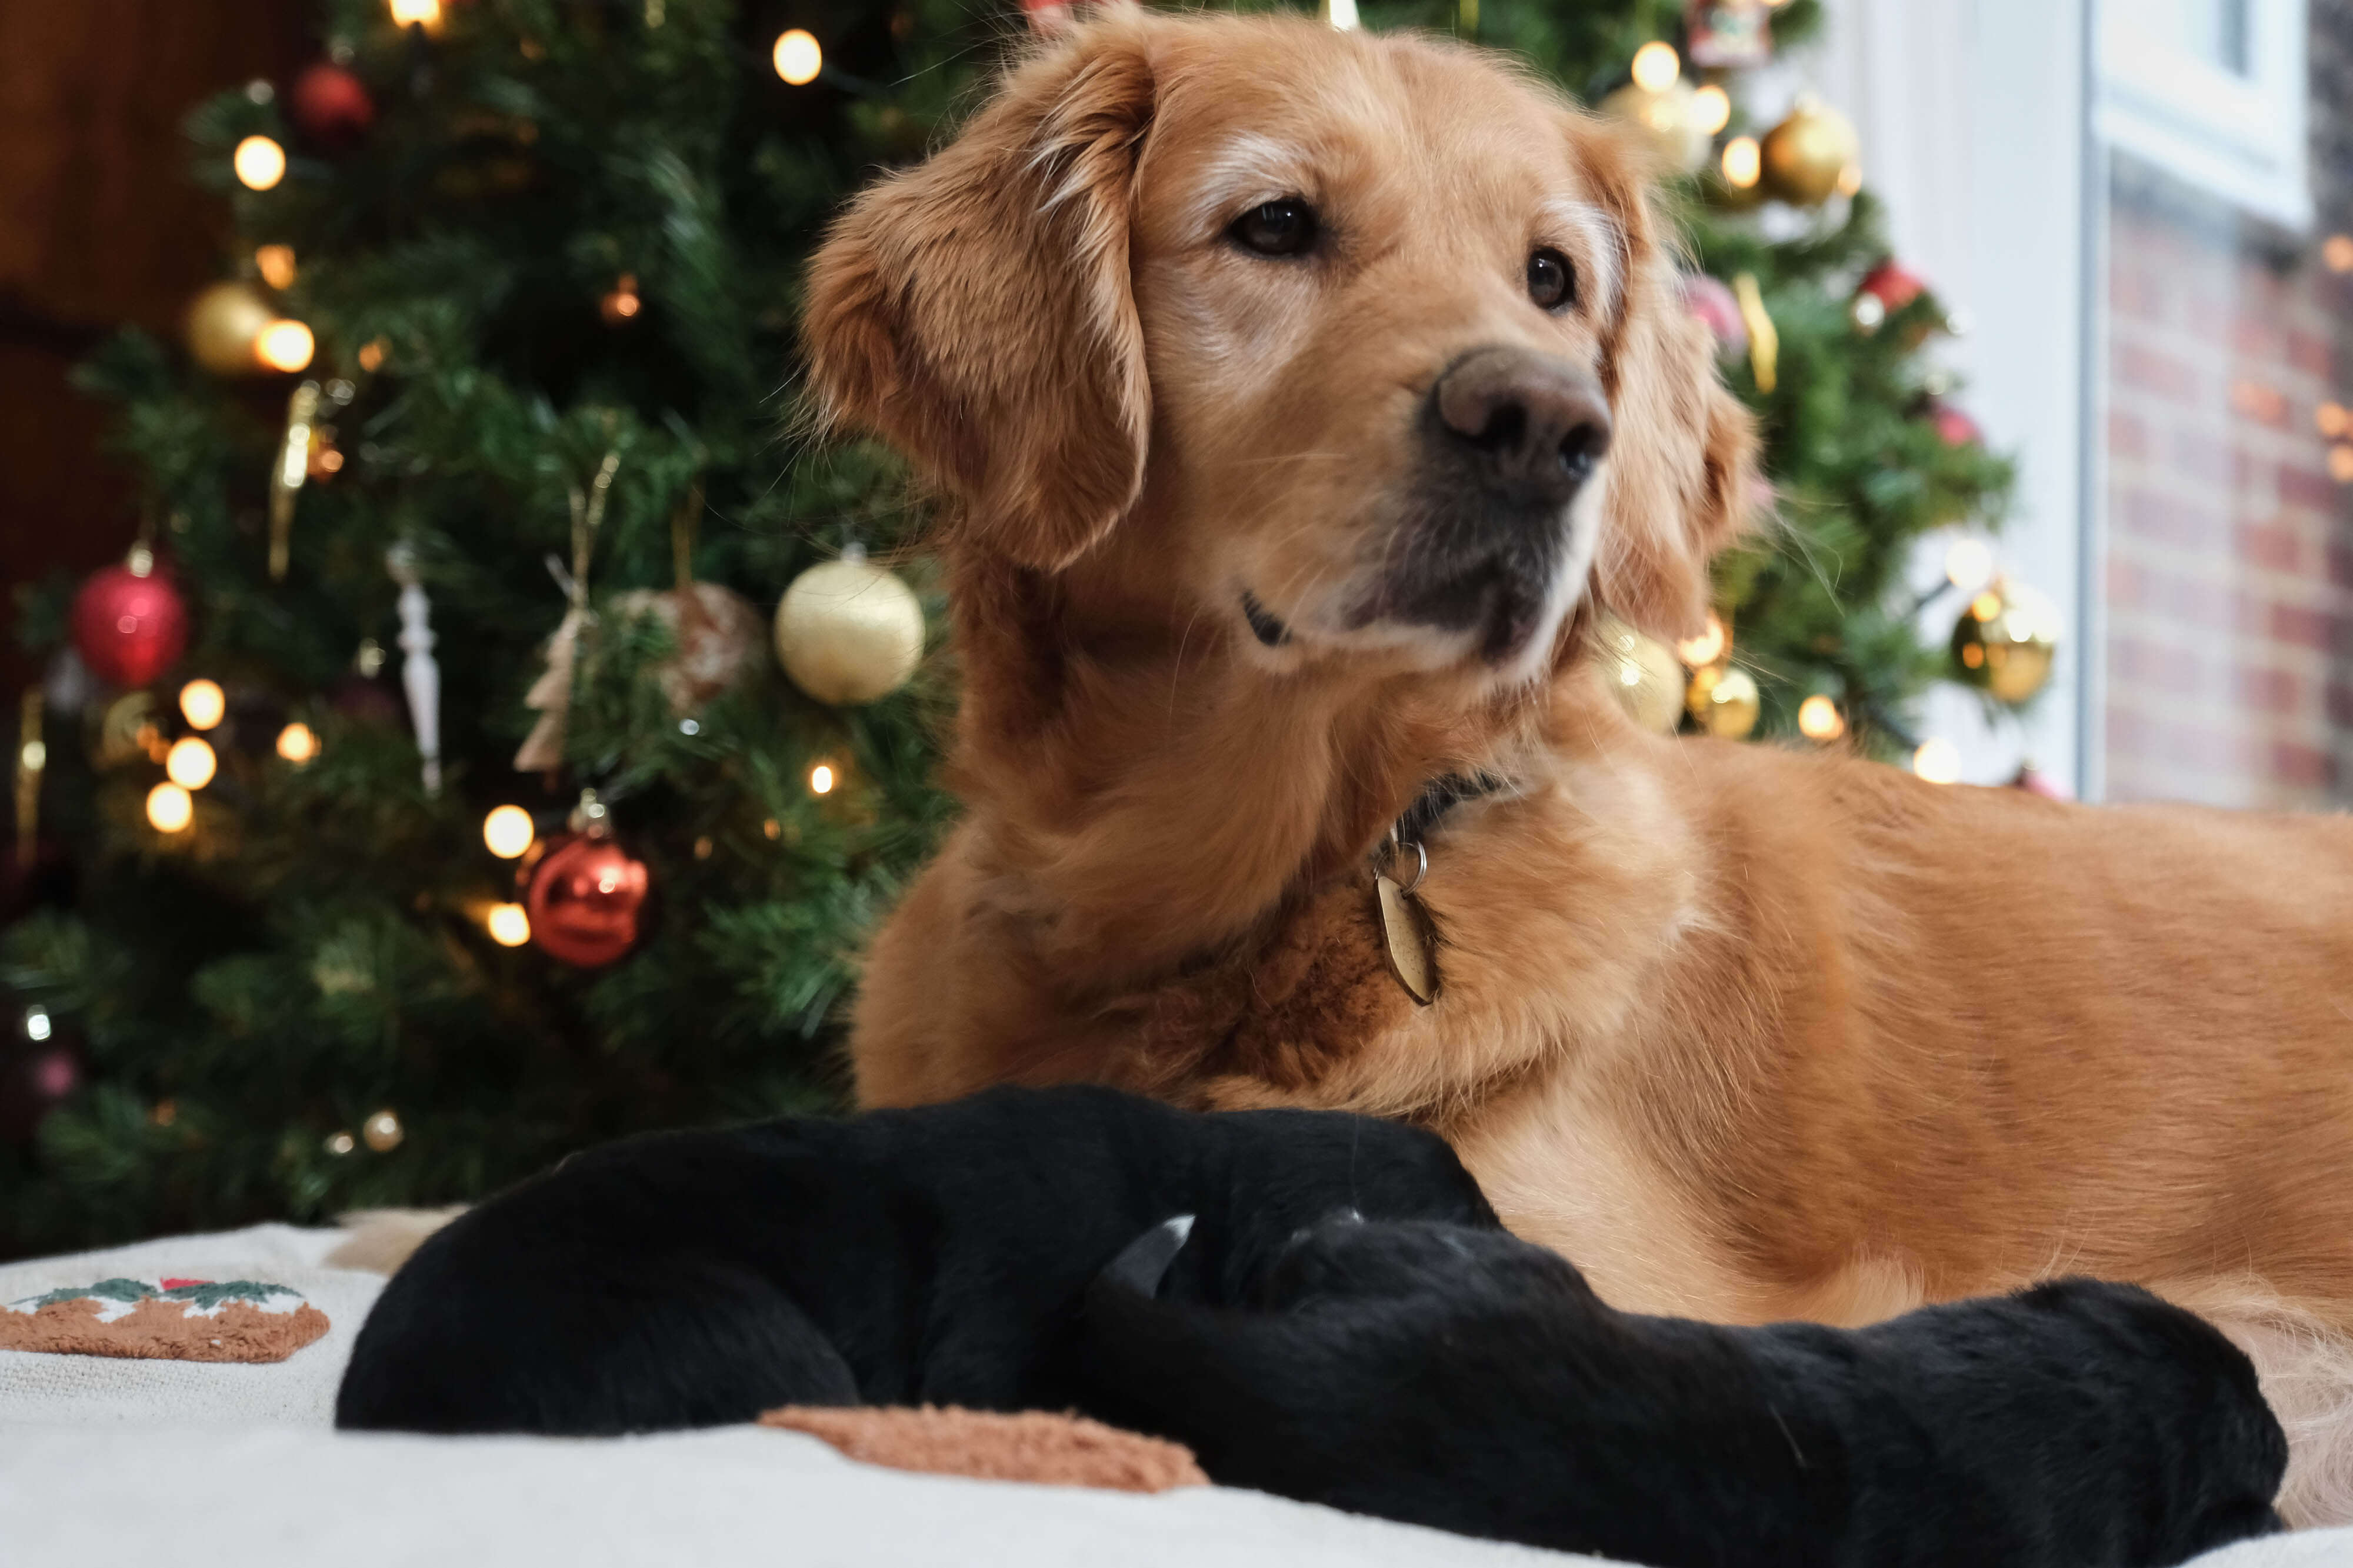 At close-up of golden retriever Puds with two of her black puppies resting in front of her. A Christmas tree is visible in the background. 